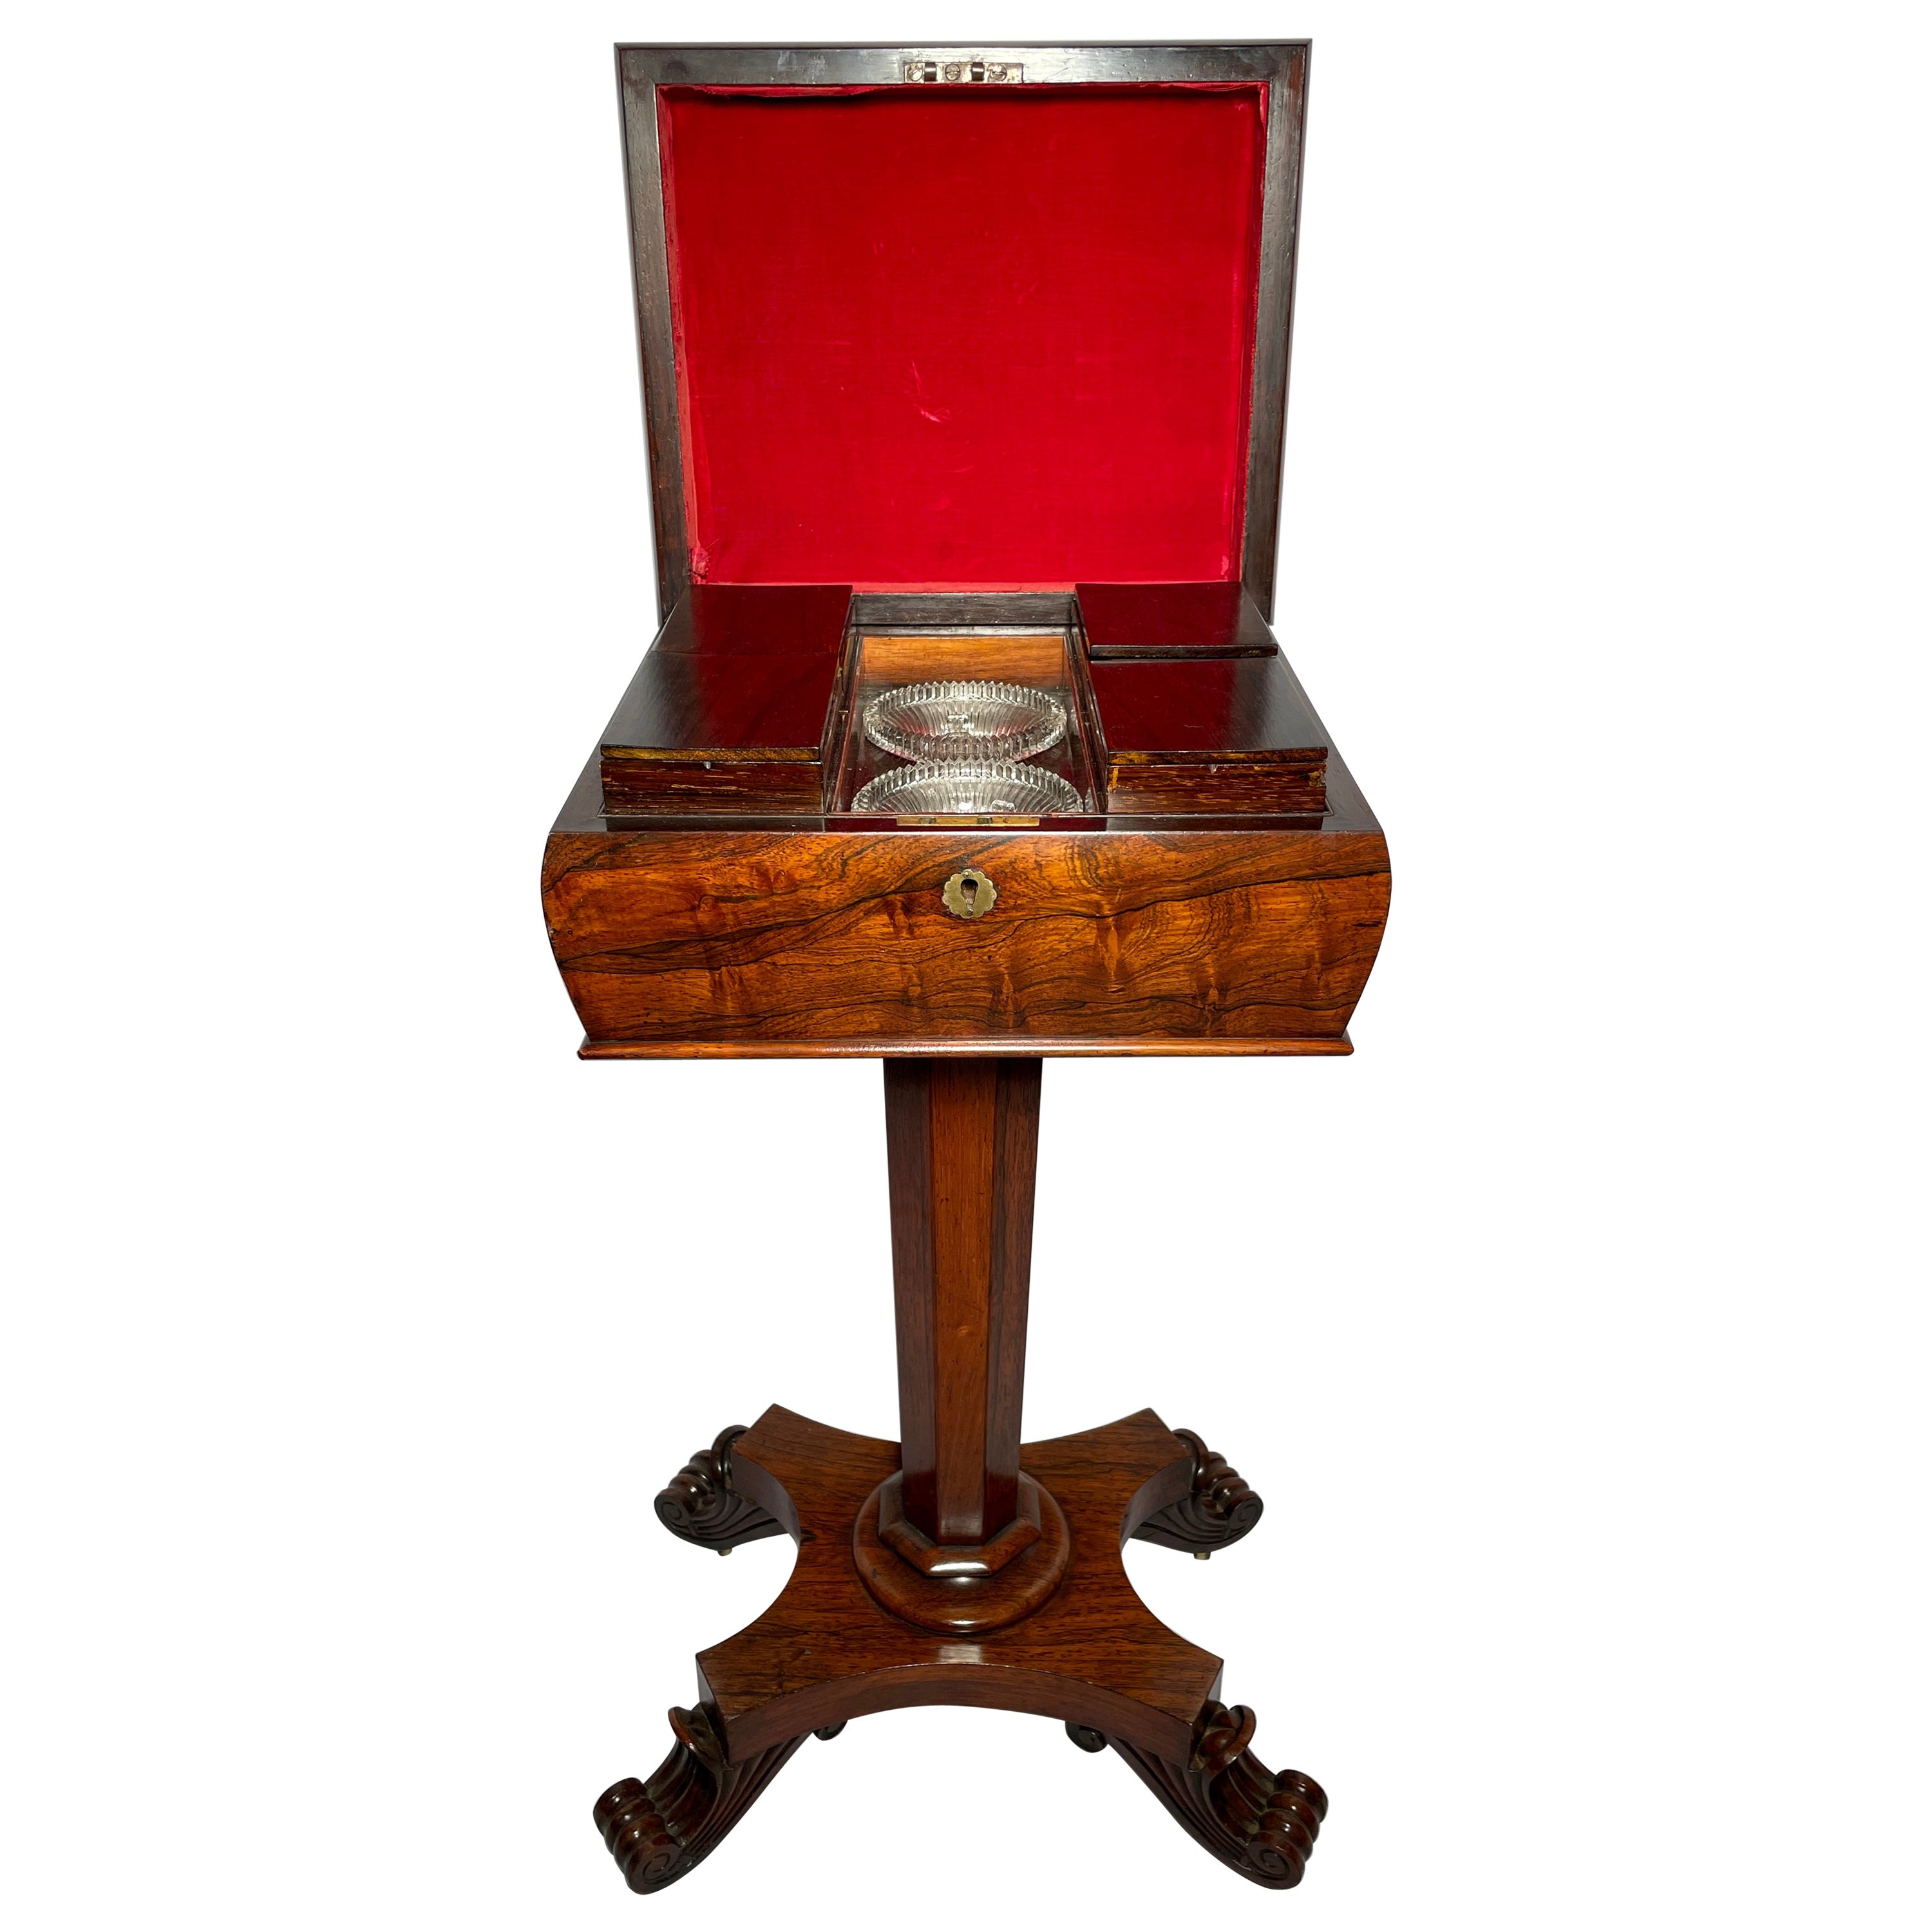 Antique English Rosewood Teapoy Table with Complete Interior, Circa 1845-1865.